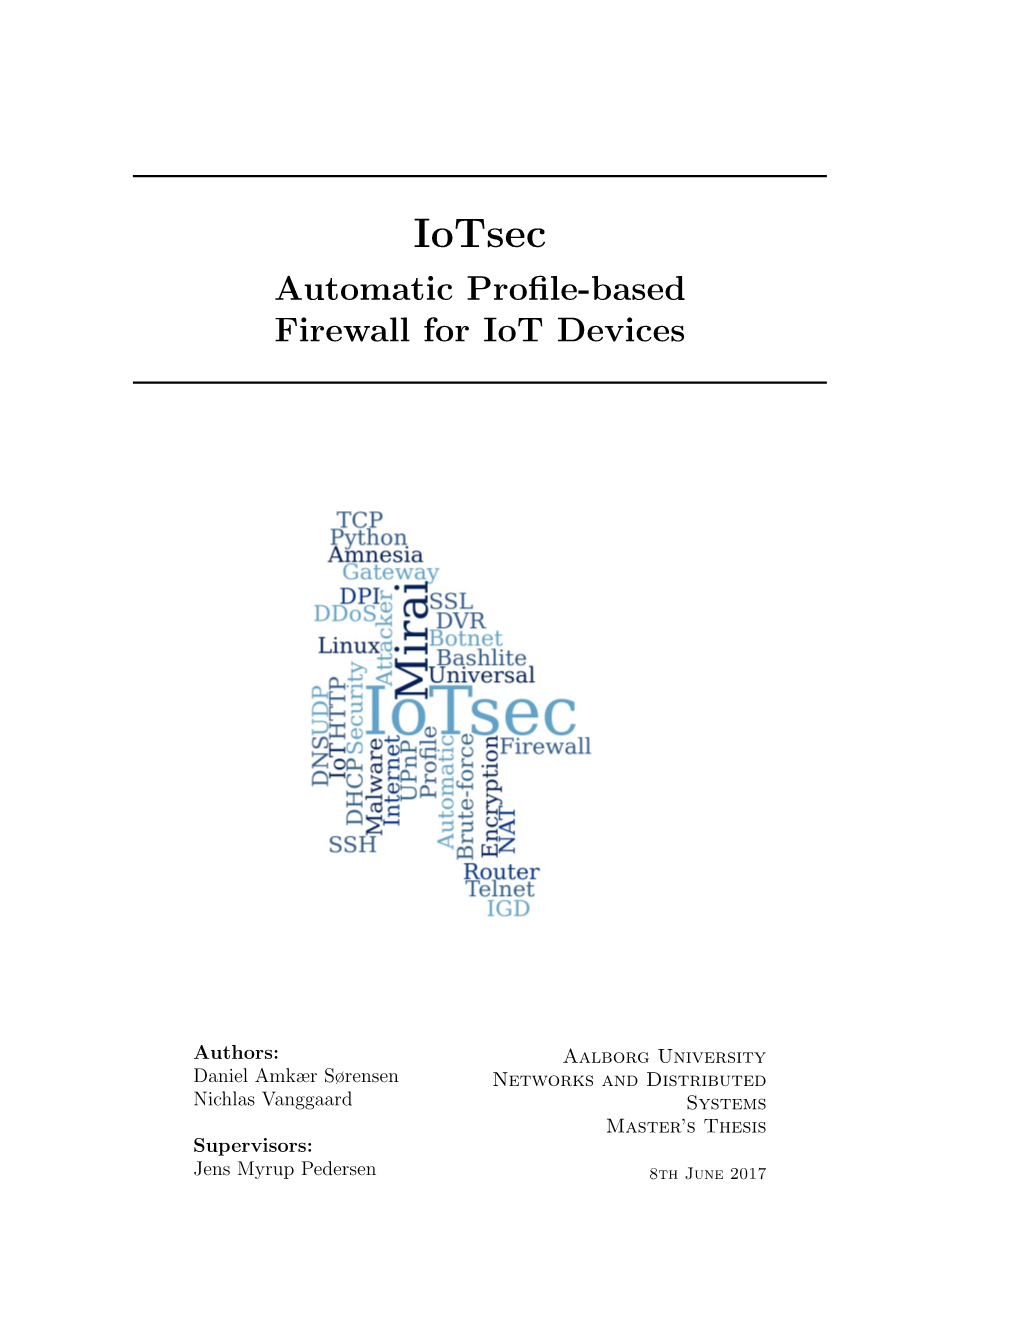 Iotsec: Automatic Profile-Based Firewall for Iot Devices